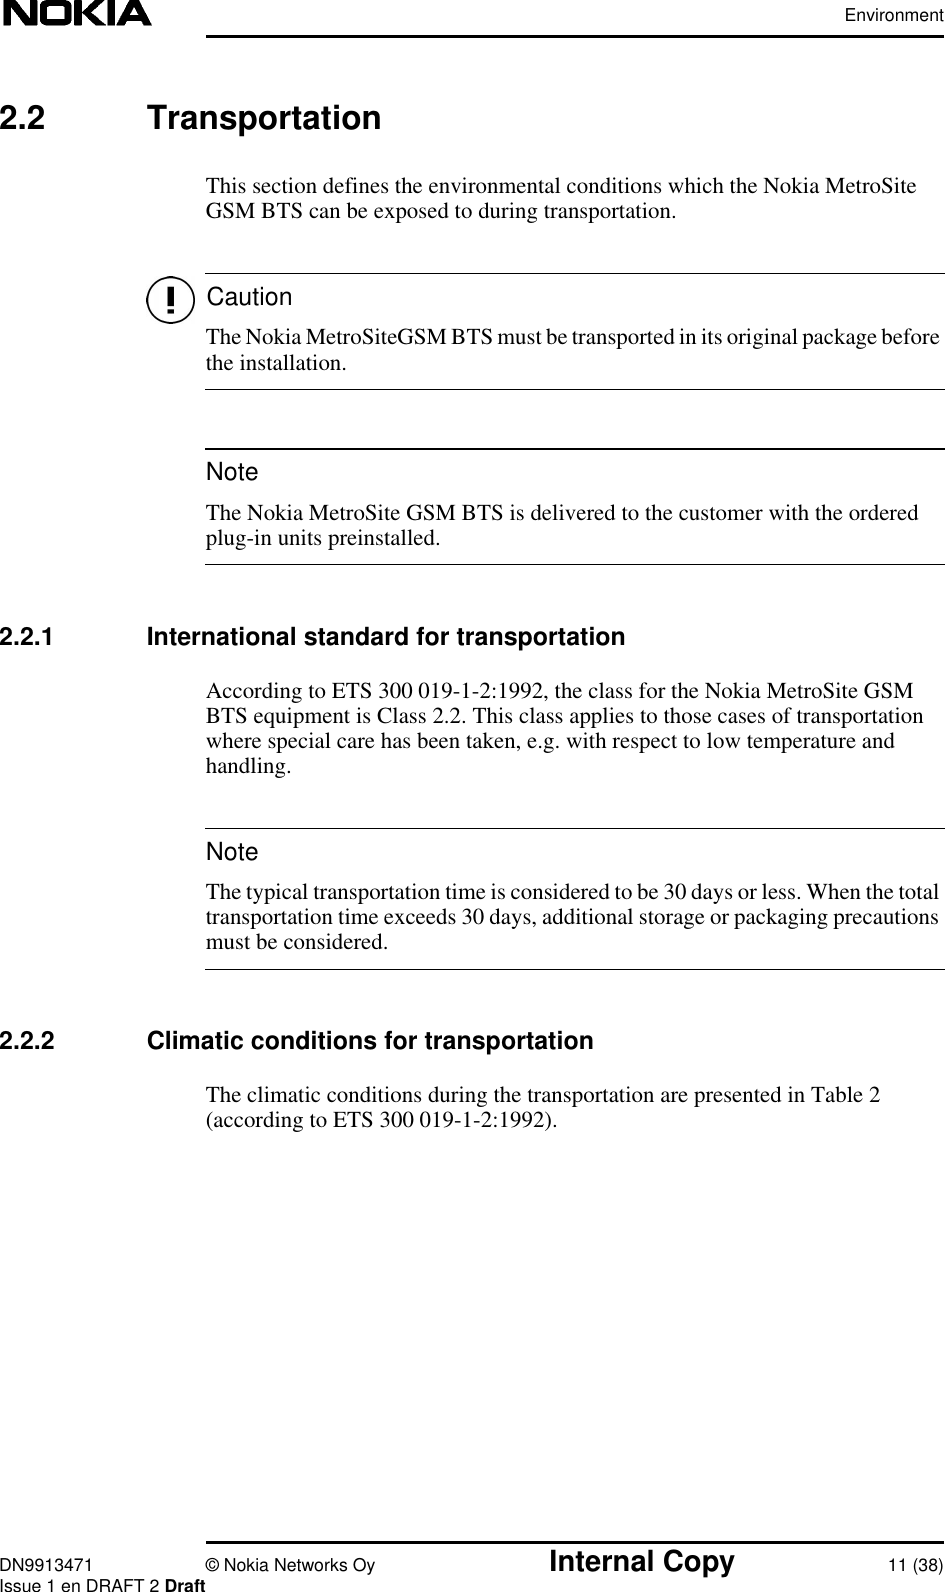 EnvironmentDN9913471 © Nokia Networks Oy Internal Copy 11 (38)Issue 1 en DRAFT 2 DraftCautionNoteNote2.2 TransportationThis section defines the environmental conditions which the Nokia MetroSiteGSM BTS can be exposed to during transportation.The Nokia MetroSiteGSM BTS must be transported in its original package beforethe installation.The Nokia MetroSite GSM BTS is delivered to the customer with the orderedplug-in units preinstalled.2.2.1 International standard for transportationAccording to ETS 300 019-1-2:1992, the class for the Nokia MetroSite GSMBTS equipment is Class 2.2. This class applies to those cases of transportationwhere special care has been taken, e.g. with respect to low temperature andhandling.The typical transportation time is considered to be 30 days or less. When the totaltransportation time exceeds 30 days, additional storage or packaging precautionsmust be considered.2.2.2 Climatic conditions for transportationThe climatic conditions during the transportation are presented in Table 2(according to ETS 300 019-1-2:1992).